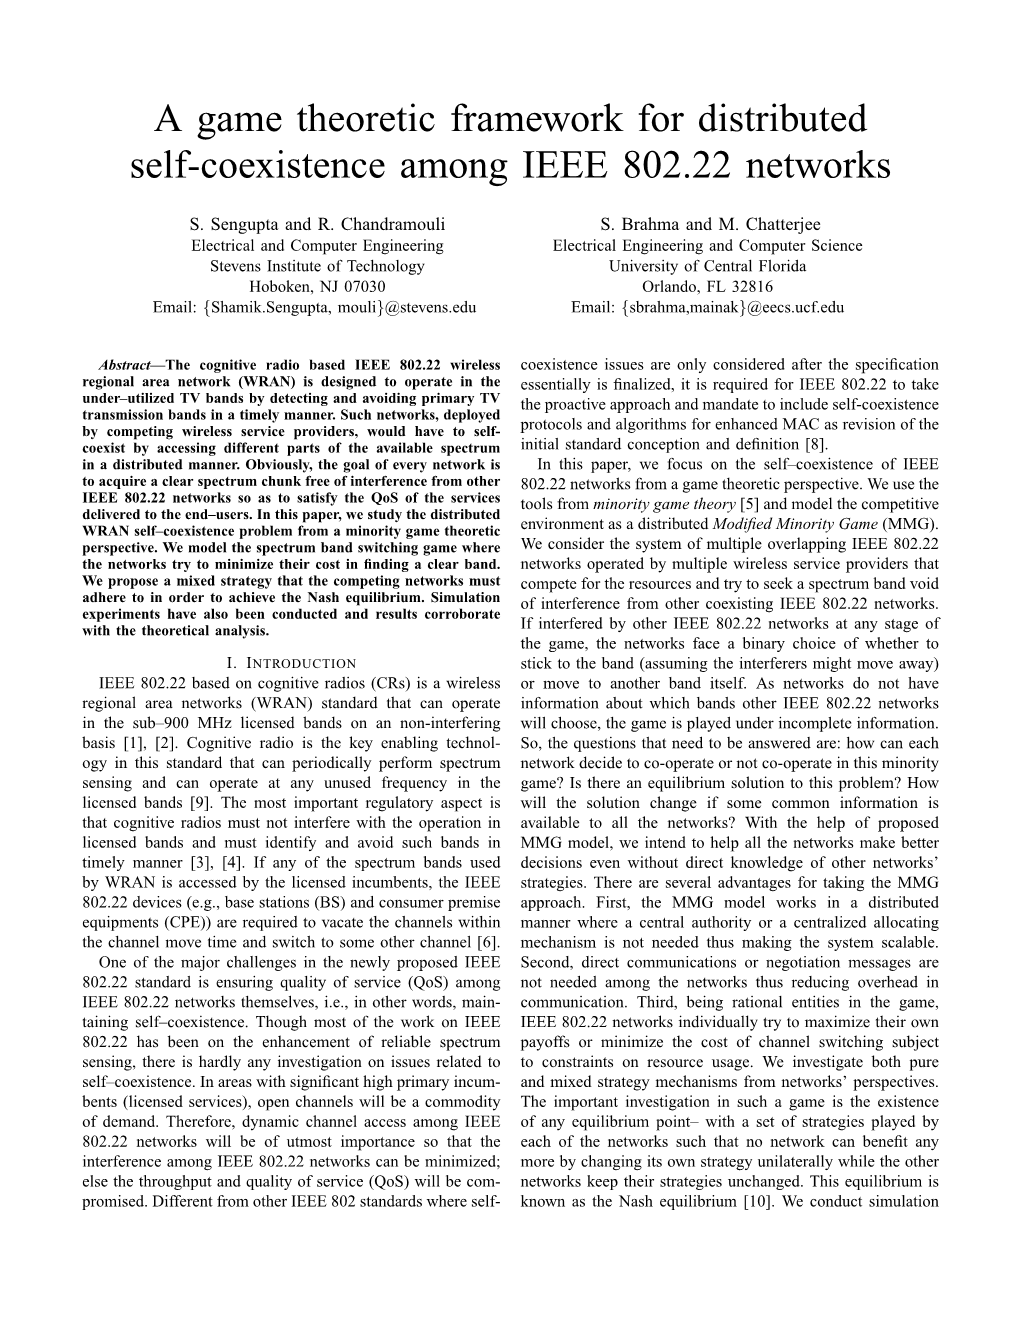 A Game Theoretic Framework for Distributed Self-Coexistence Among IEEE 802.22 Networks